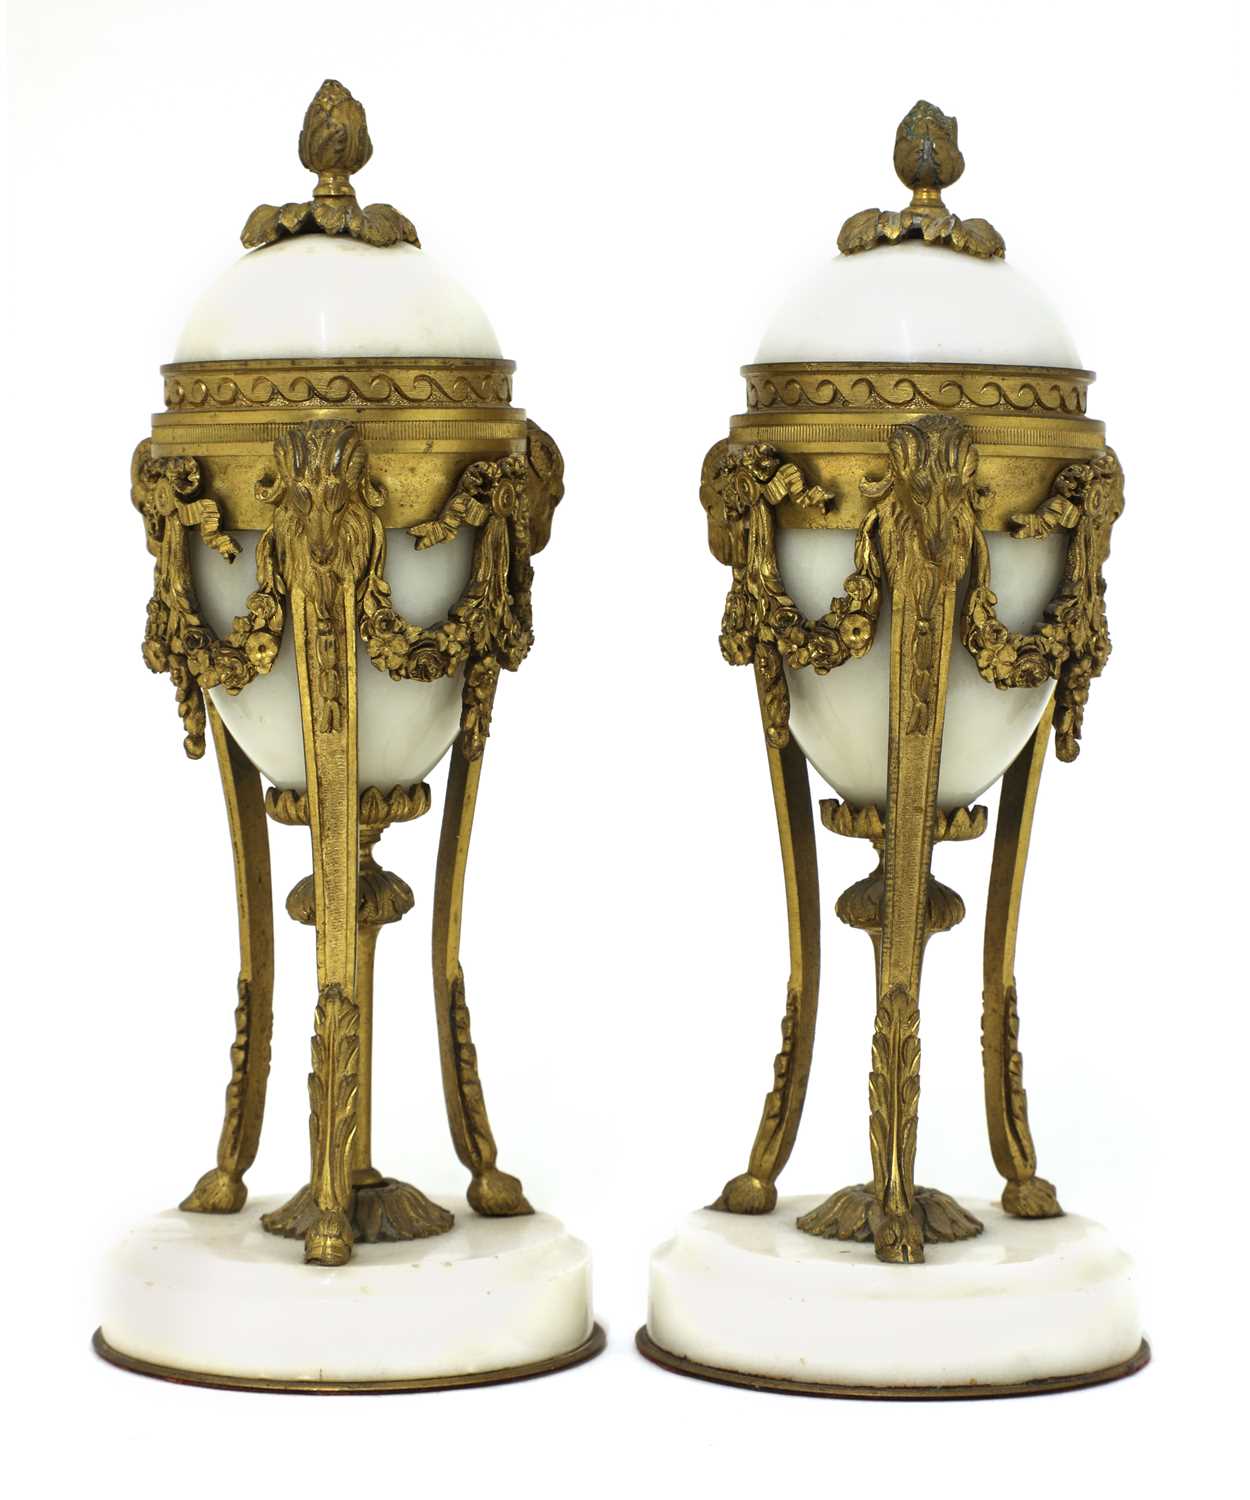 A pair of French Empire-style white marble and ormolu cassolettes, - Image 2 of 5